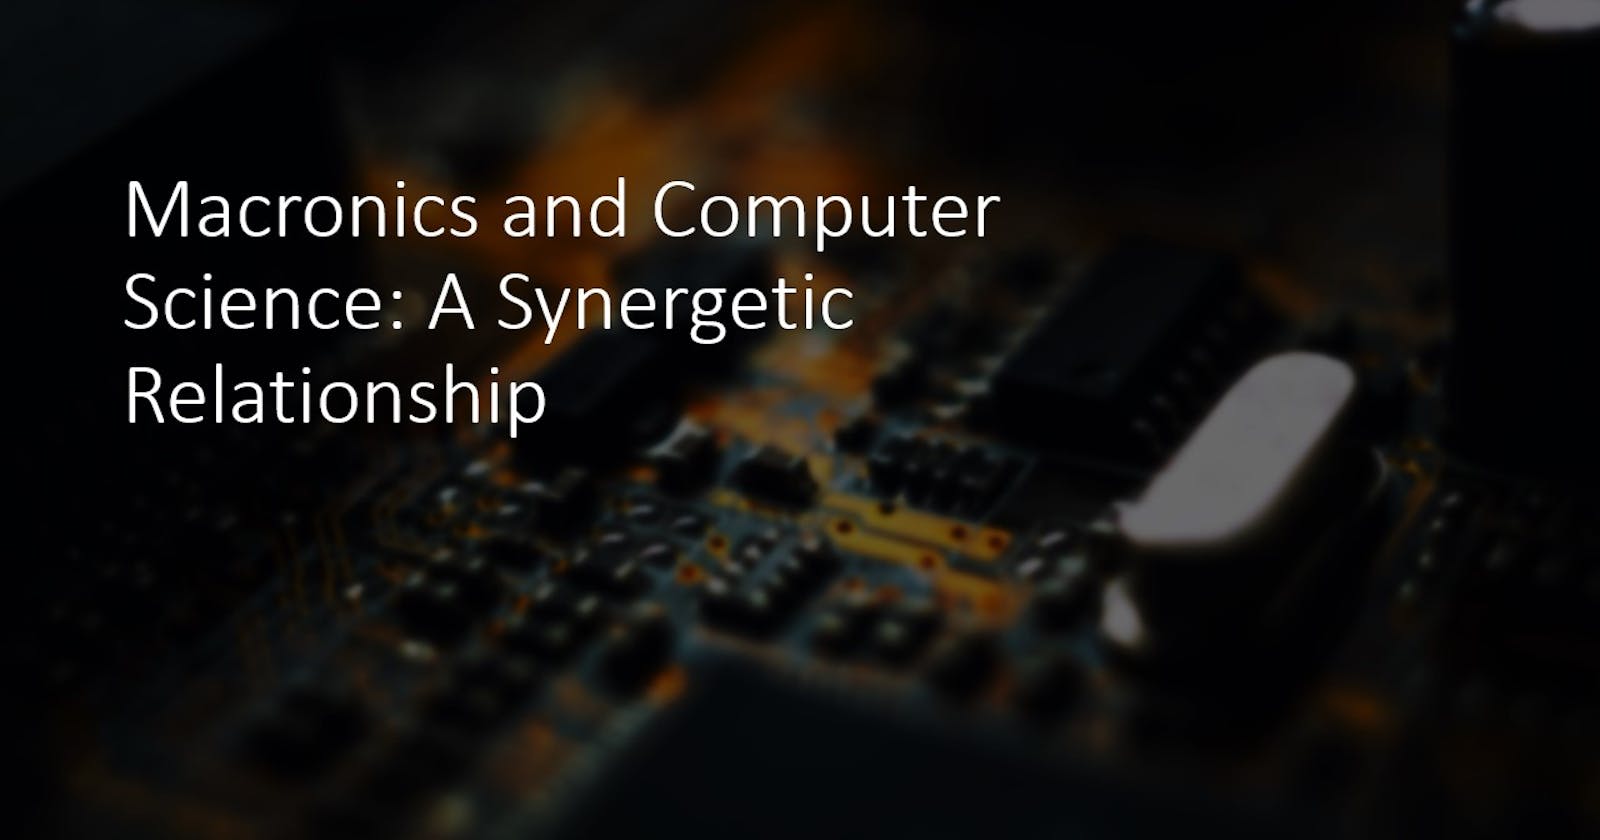 Macronics and Computer Science: A Synergetic Relationship